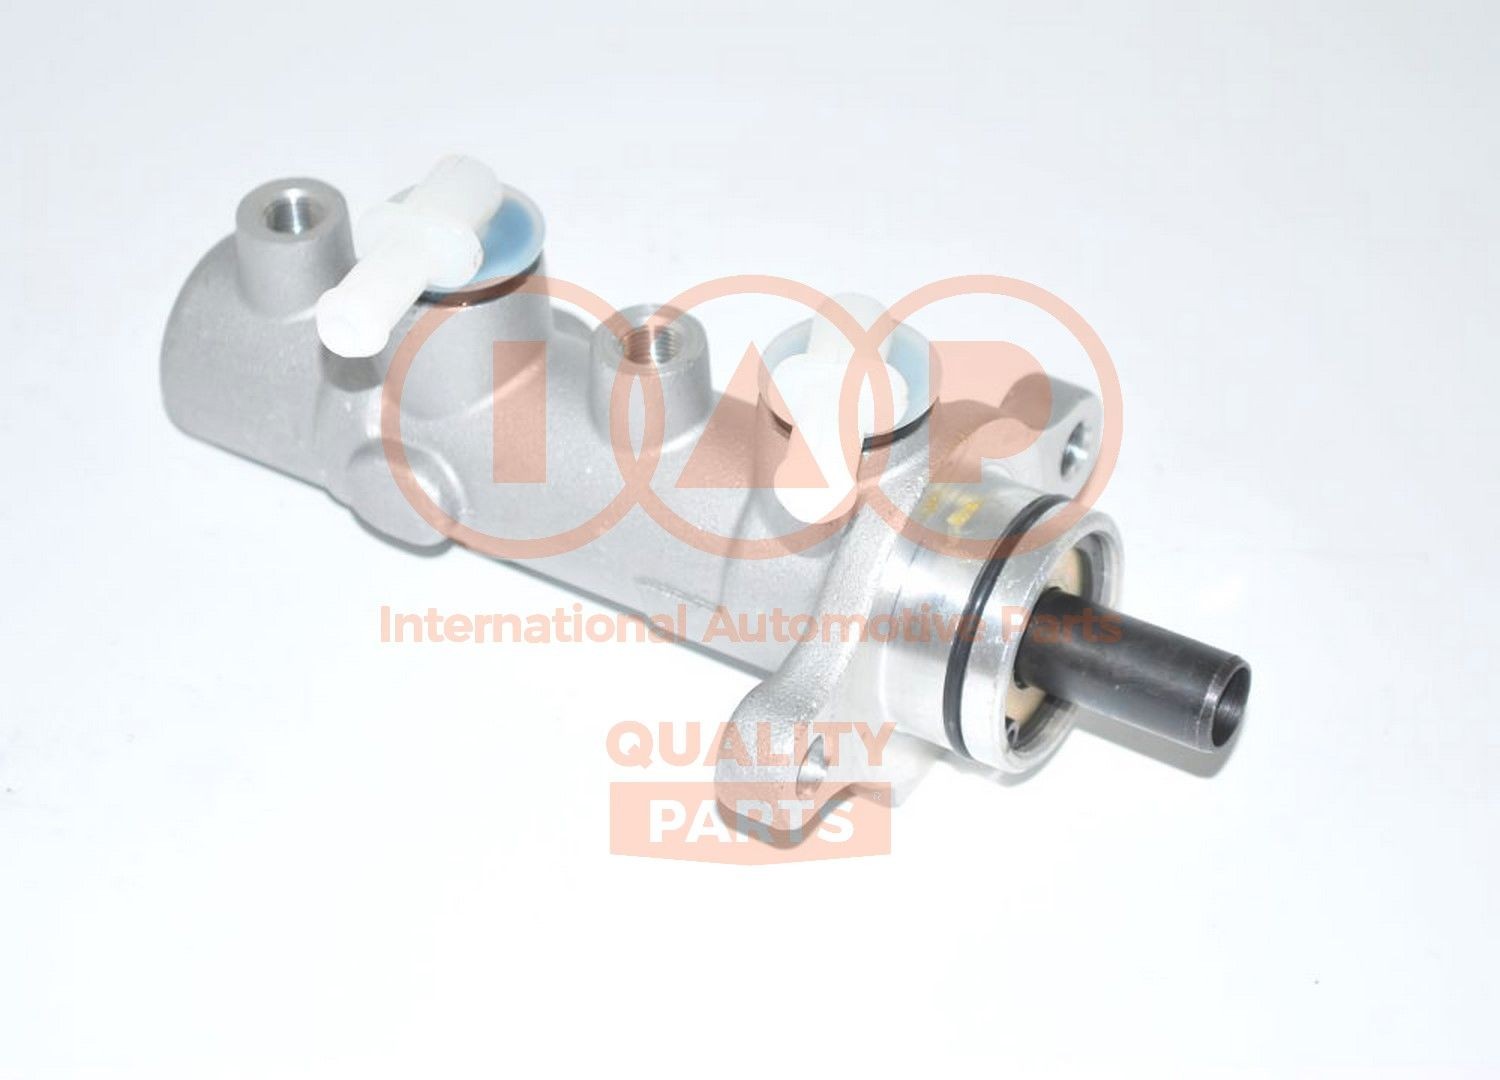 IAP QUALITY PARTS Master cylinder 702-21082 for K2500